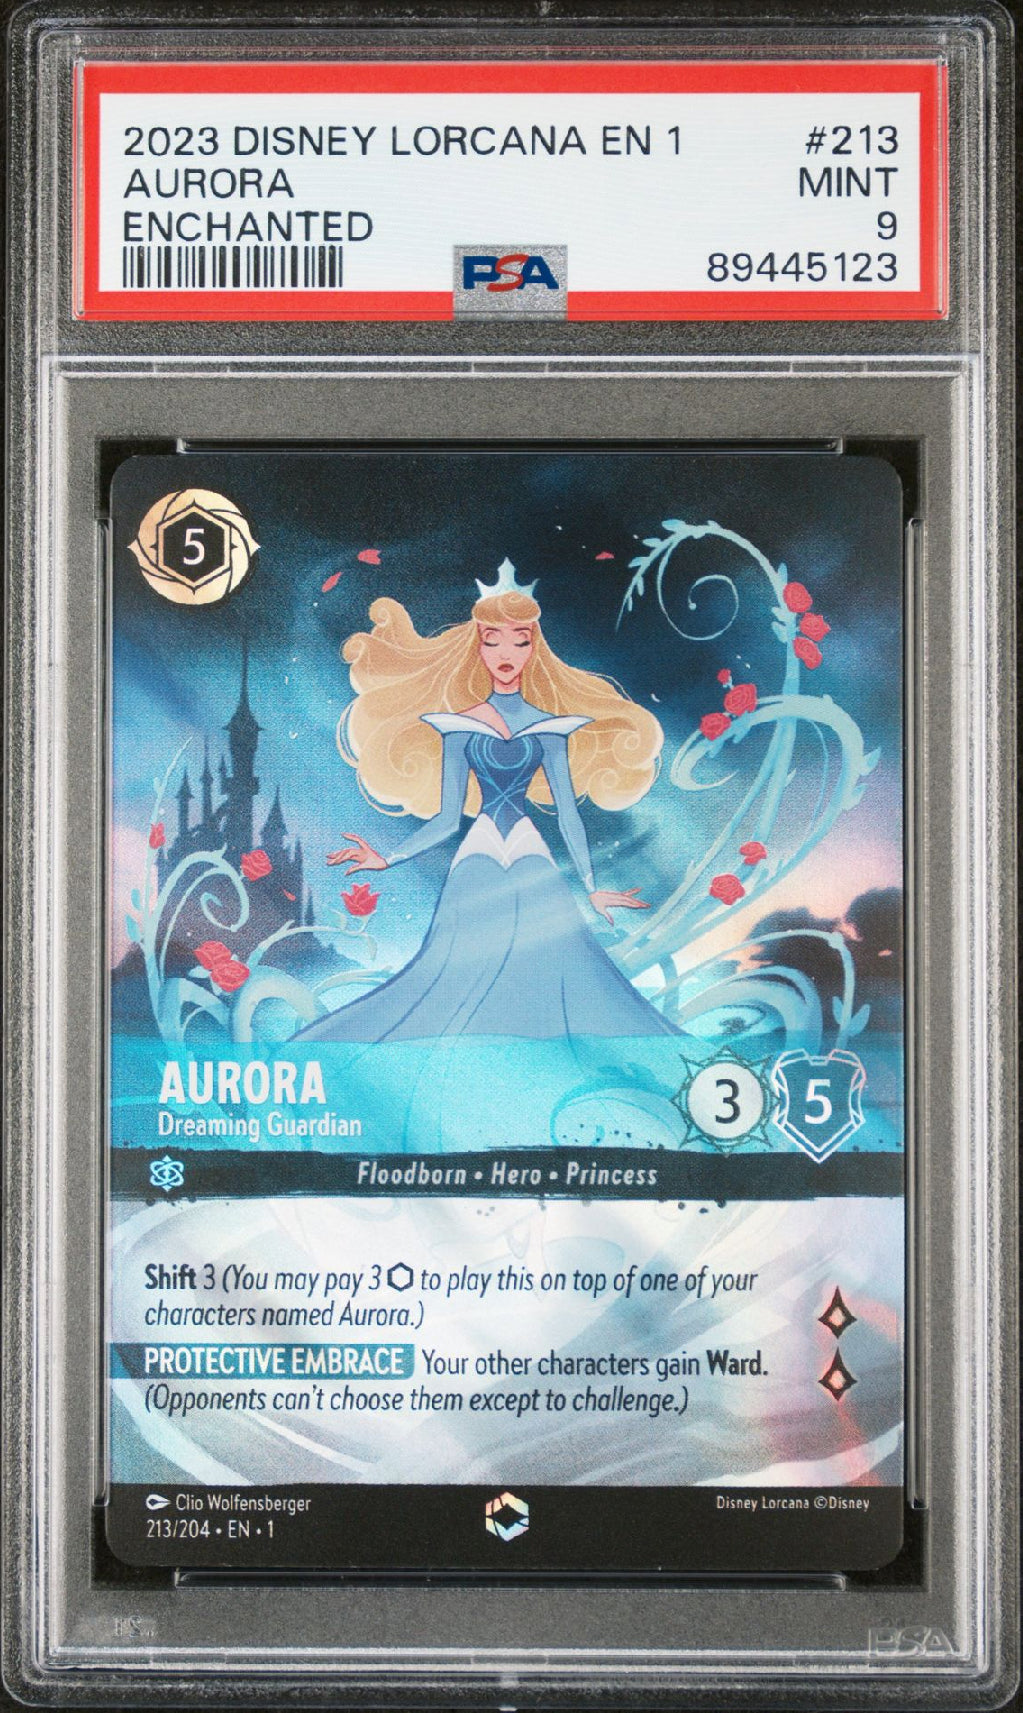 Aurora - Dreaming Guardian - [Foil, Enchanted, Graded PSA 9] The First Chapter (1)